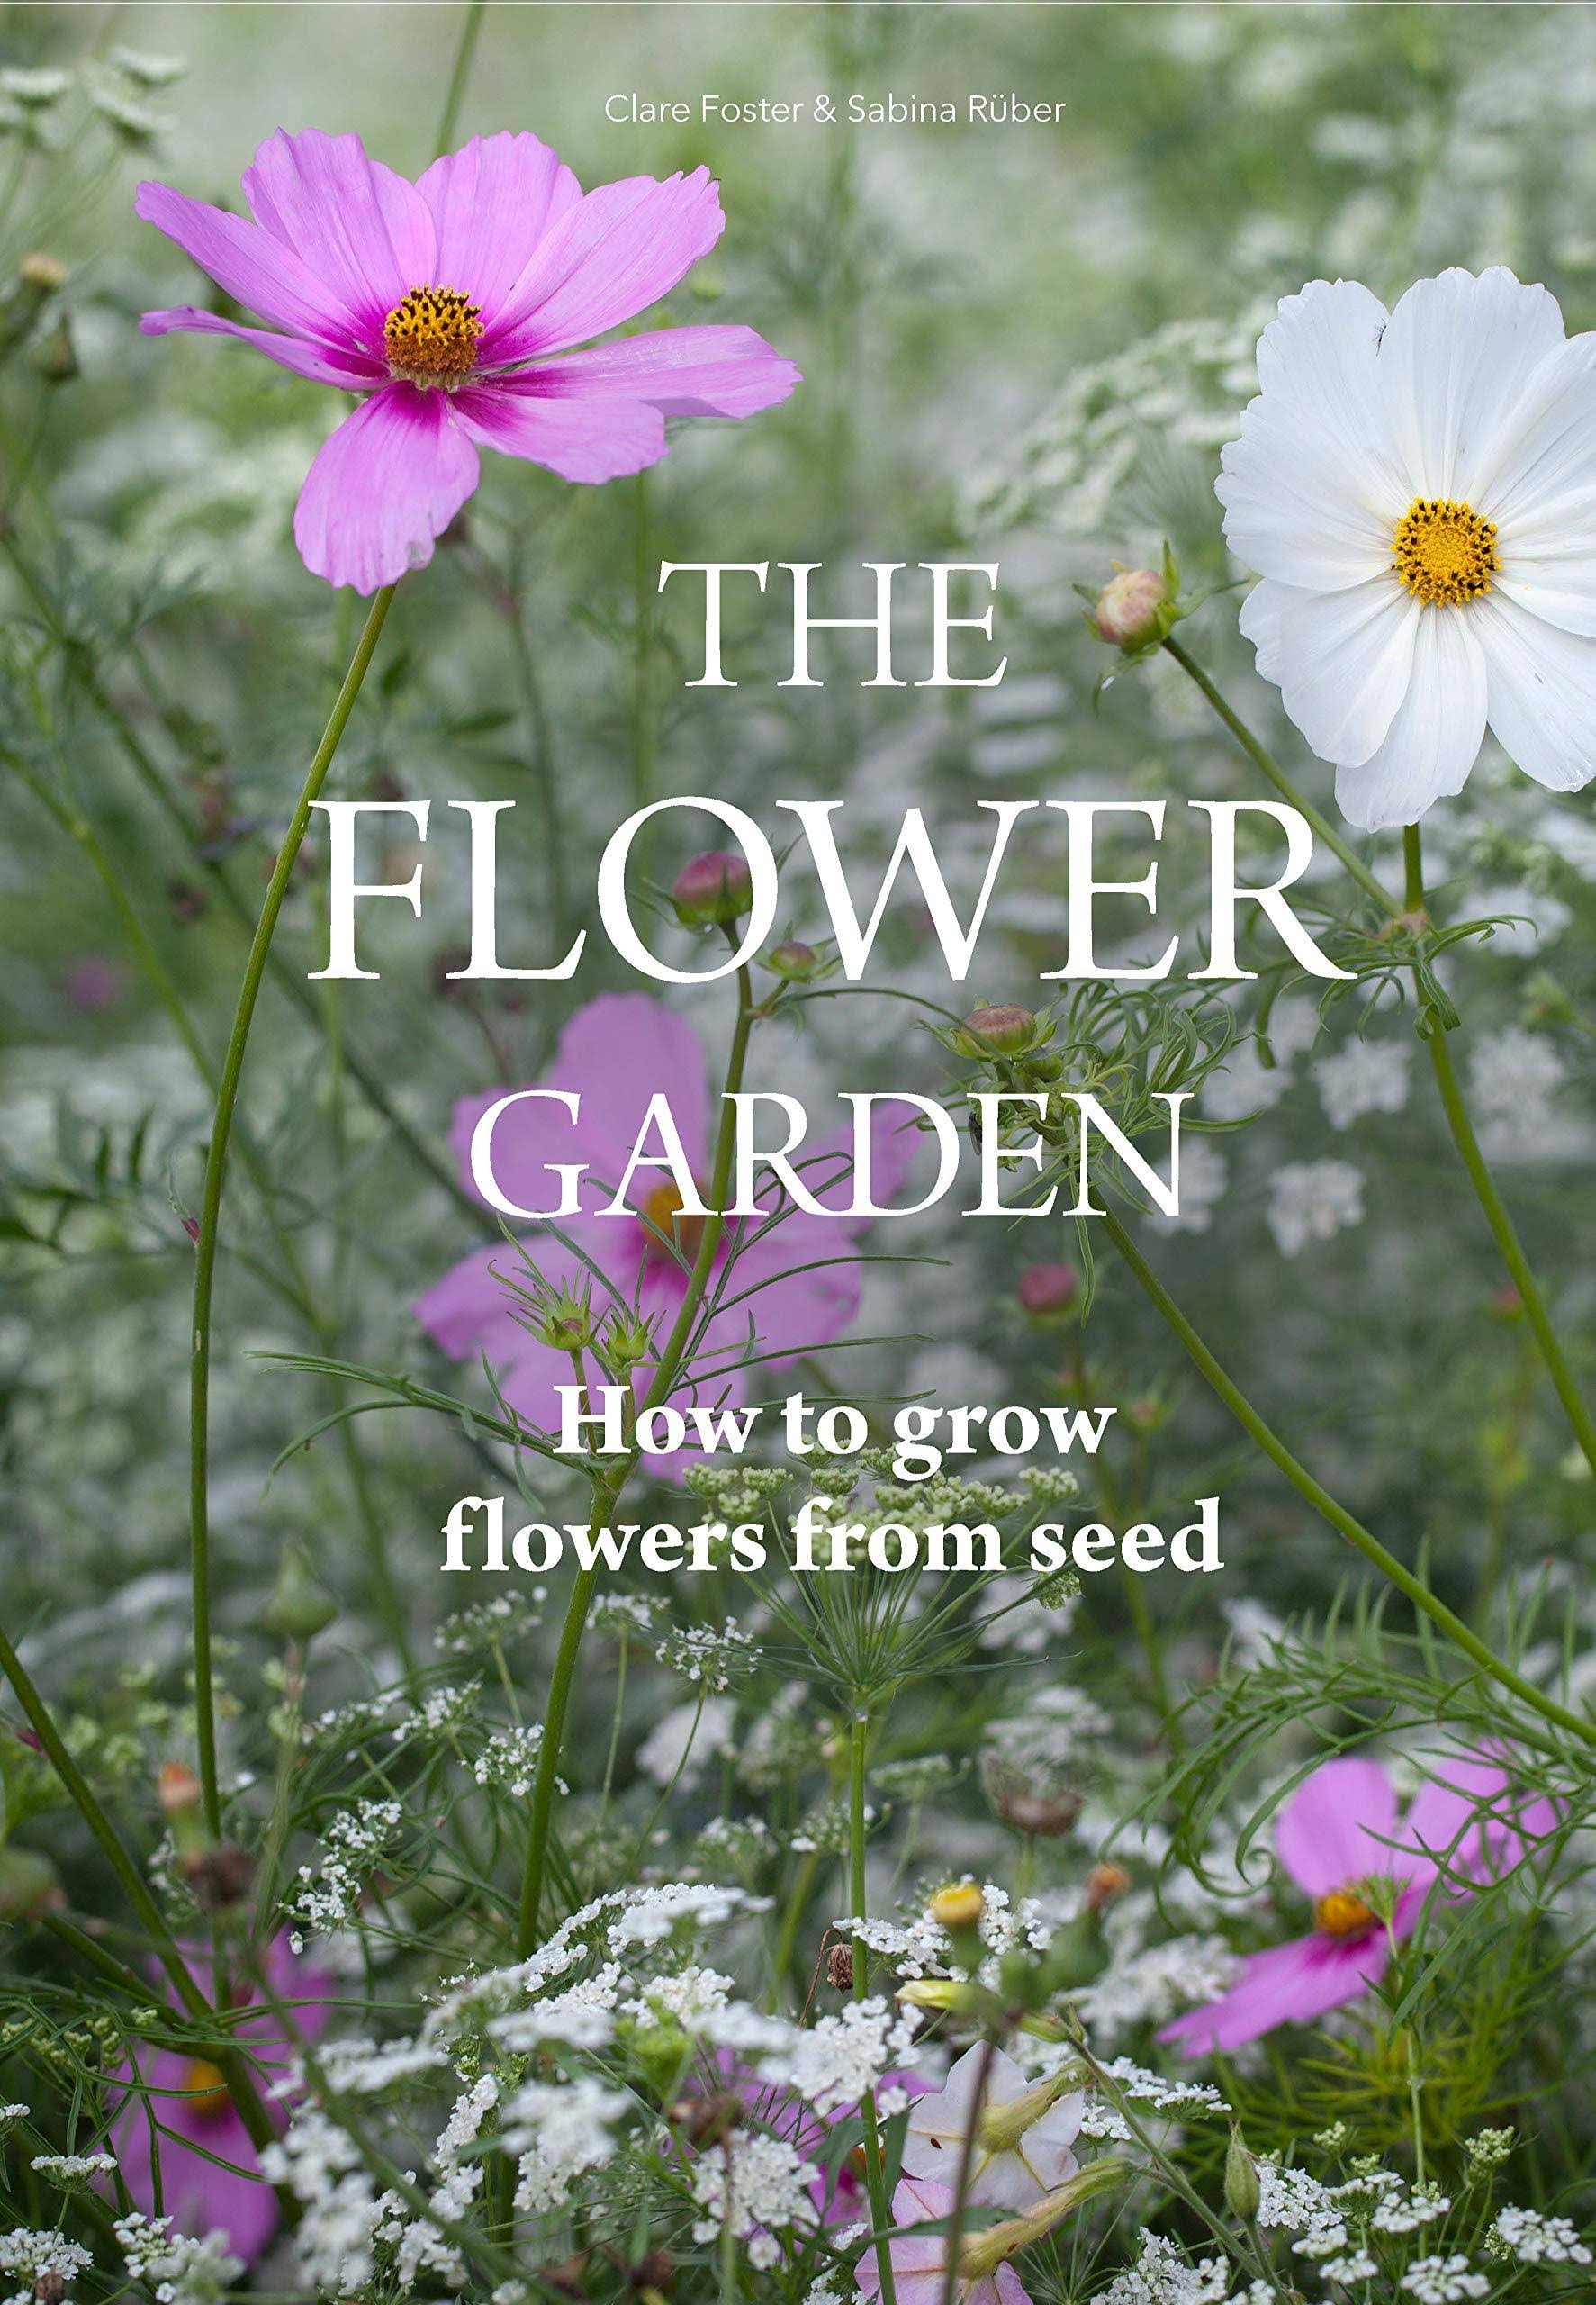 Flower Garden: How to Grow Flowers from Seed by Clare Foster